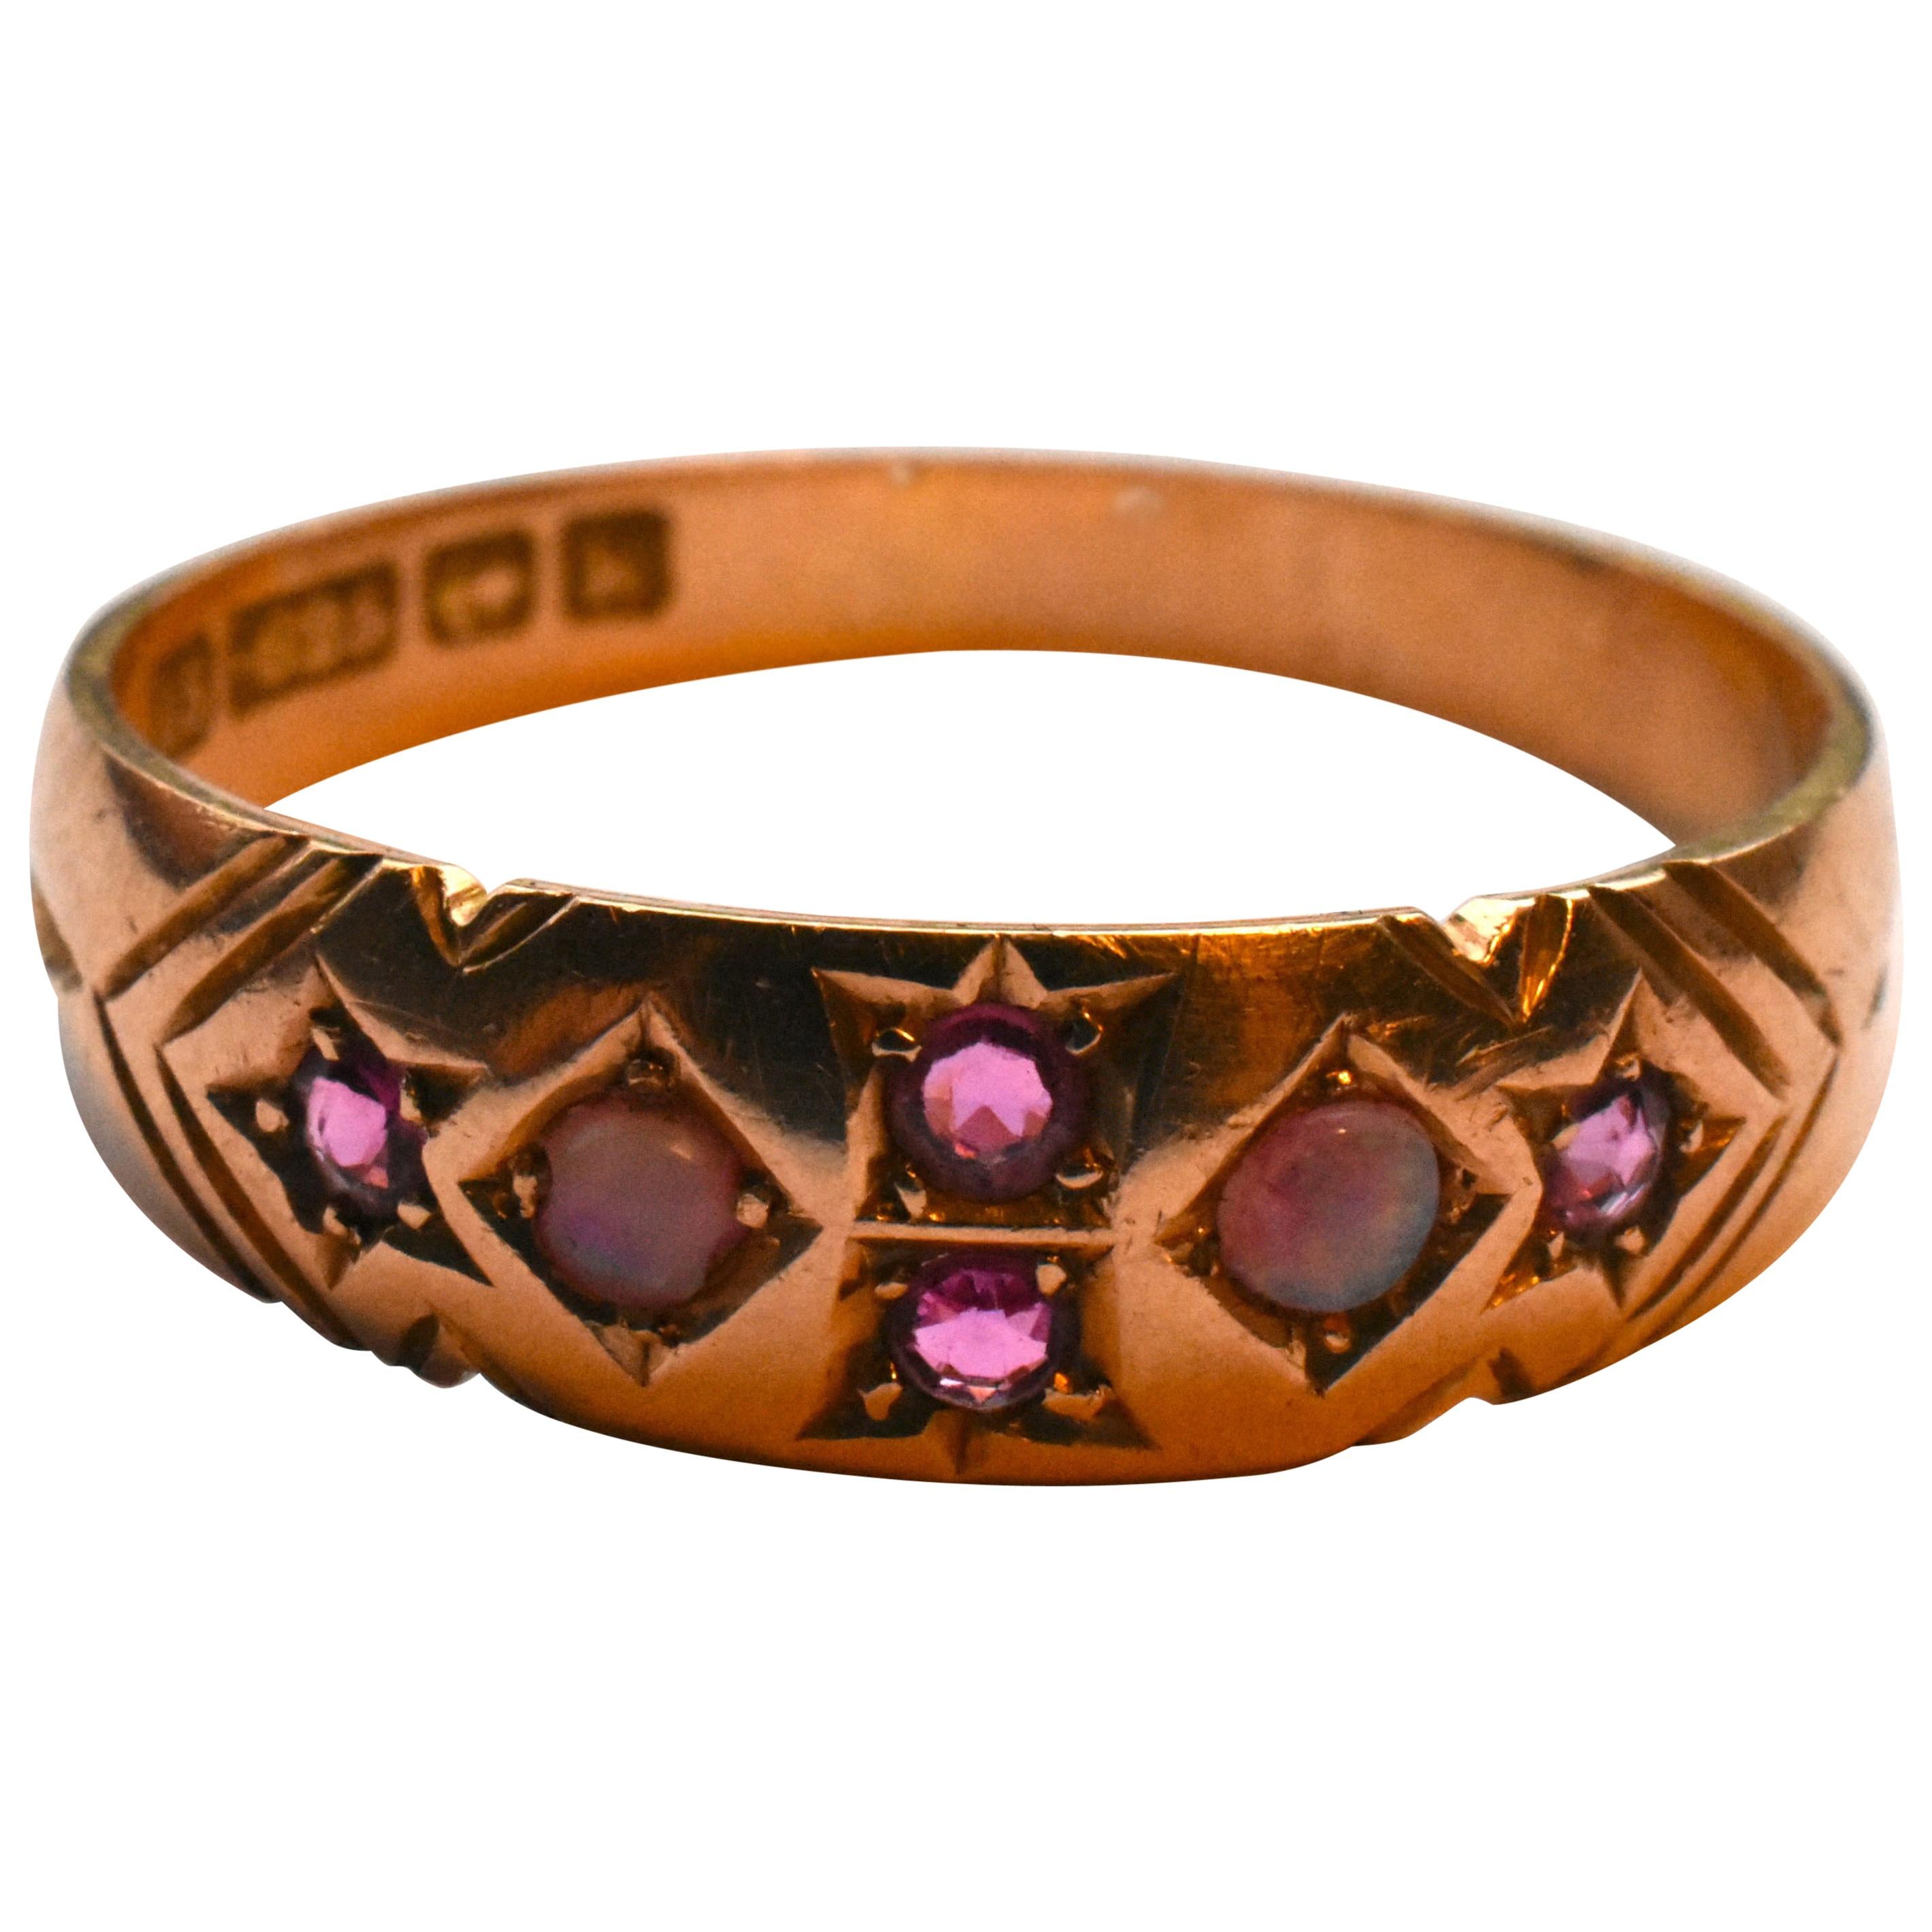 Antique 15 Karat Gypsy Ring with Rubies and Opals